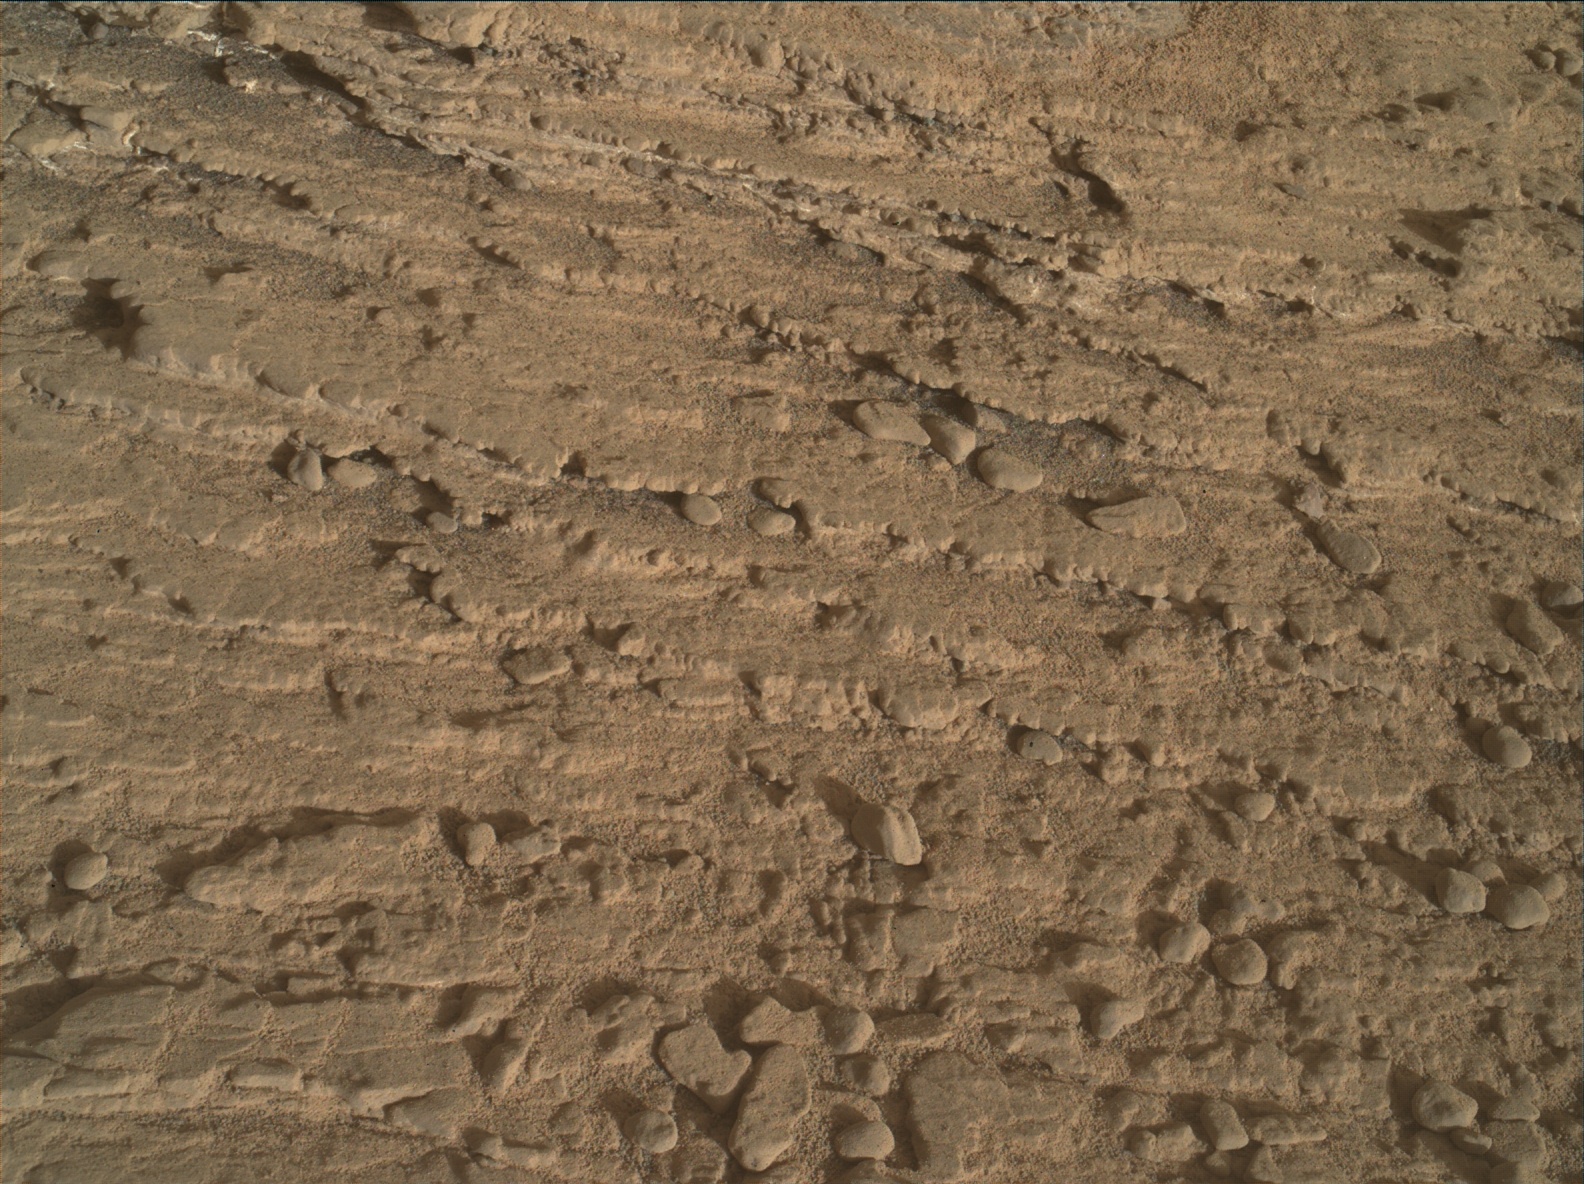 Nasa's Mars rover Curiosity acquired this image using its Mars Hand Lens Imager (MAHLI) on Sol 2484